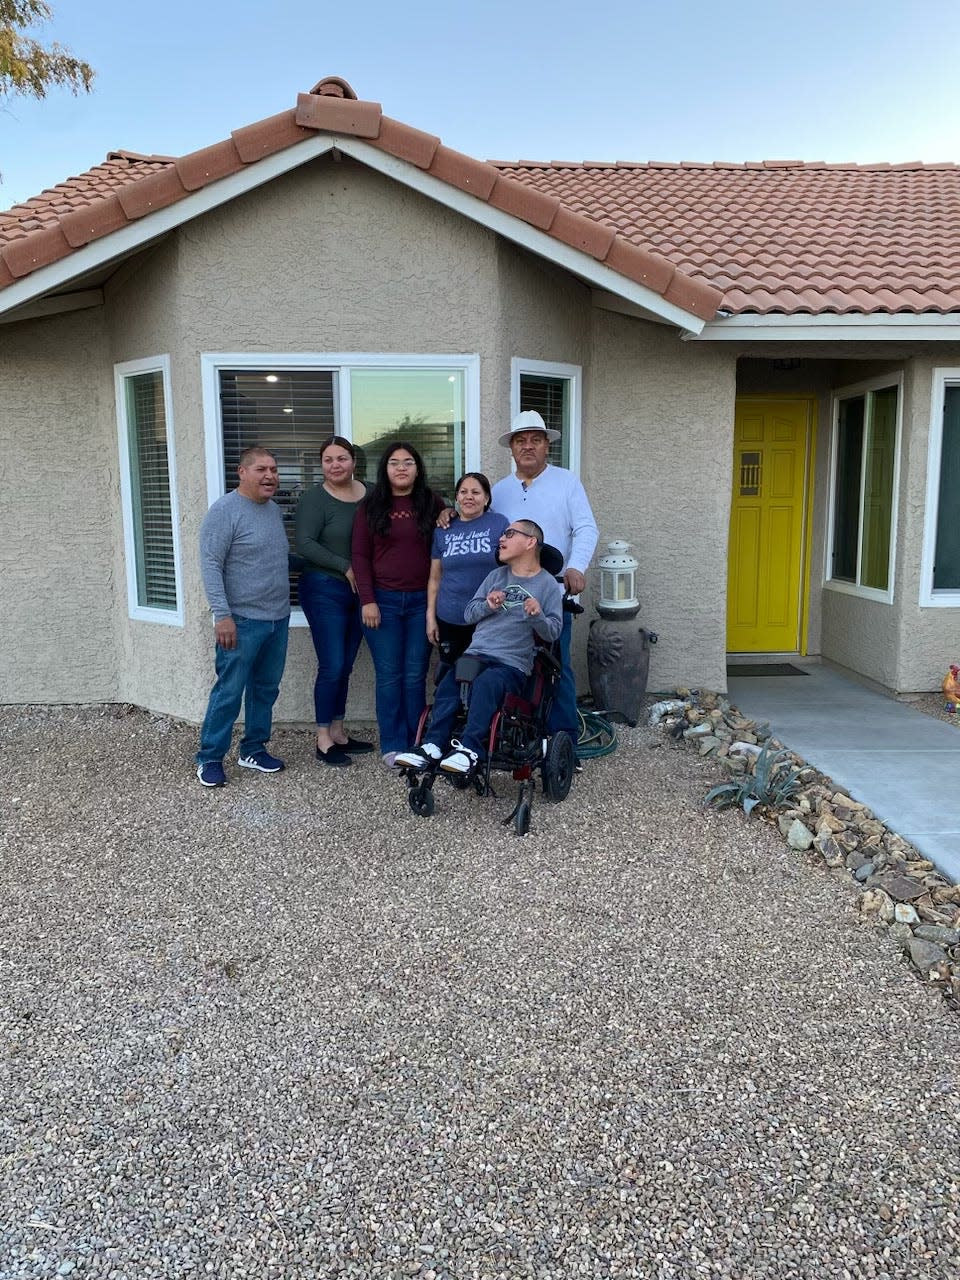 Juan Carlos López Flores (in hat) and his wife, Maria Chavarría, bought their first house in Las Vegas. He and his brother's family will live in the house together.